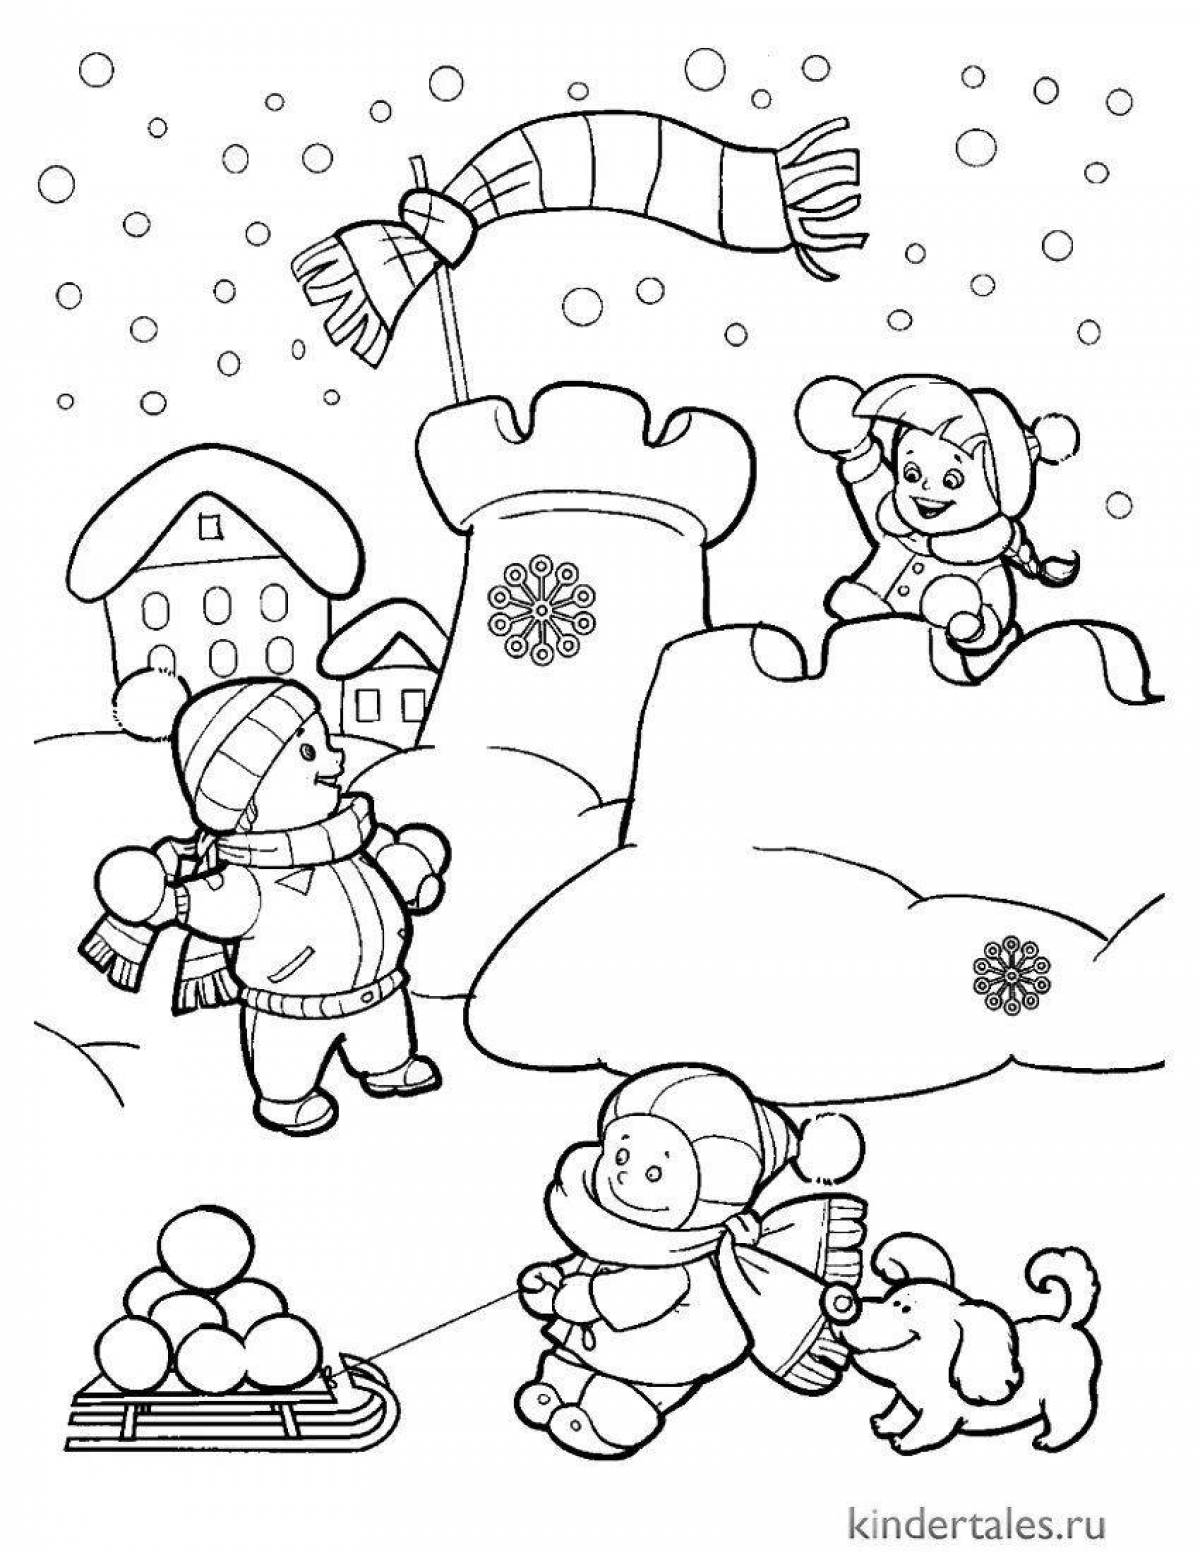 Coloring page violent children playing snowballs